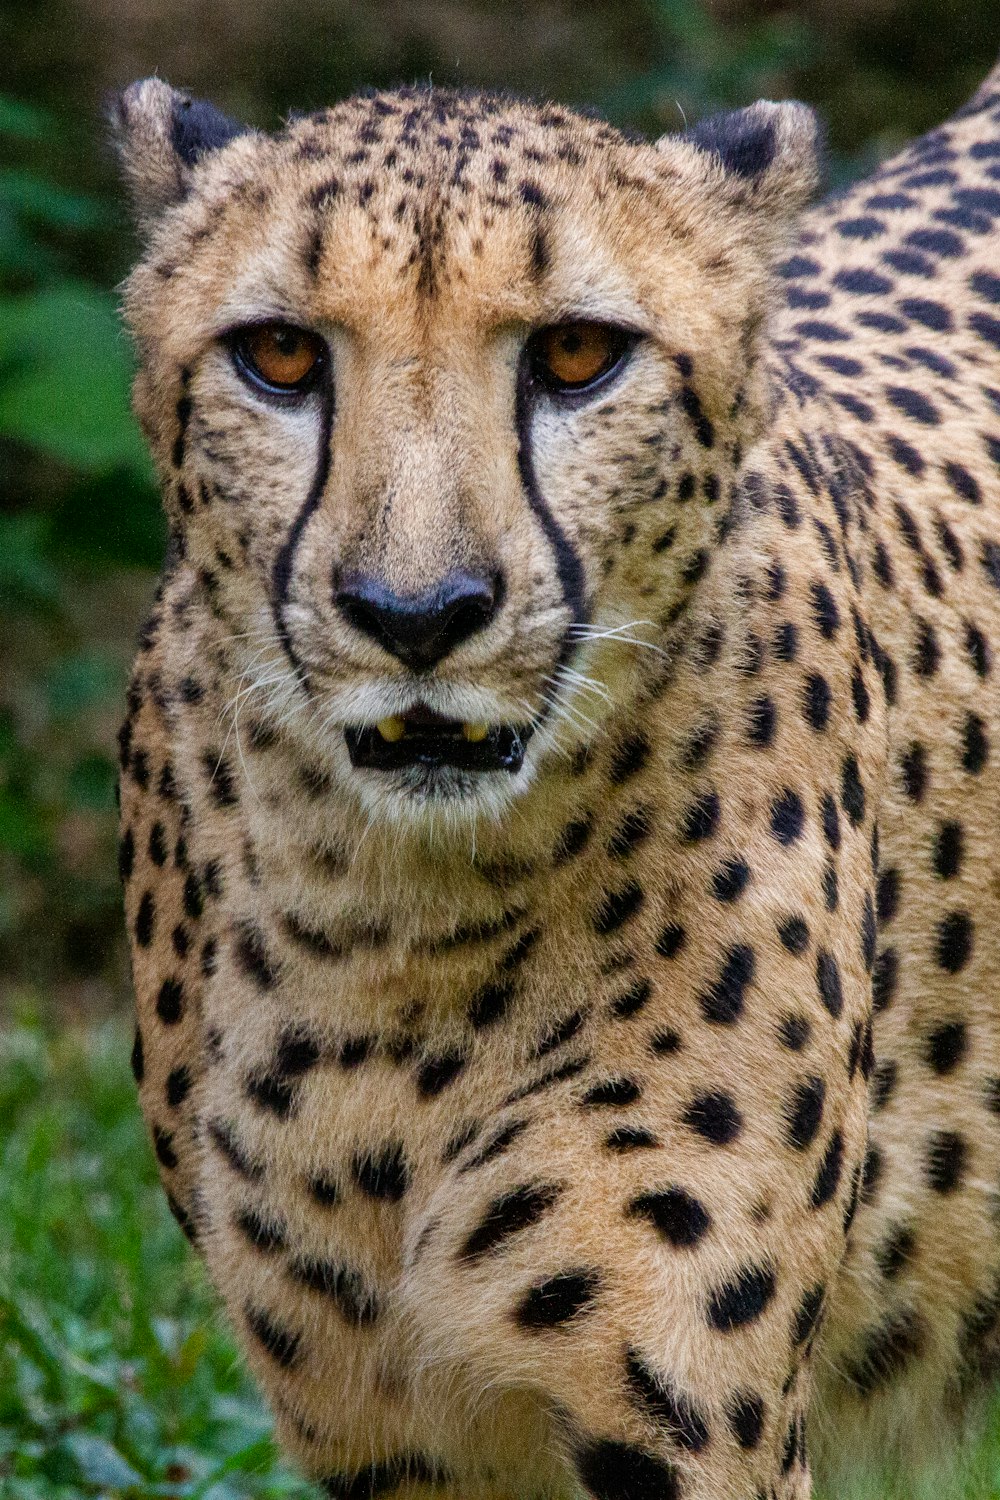 brown and black cheetah on green grass during daytime